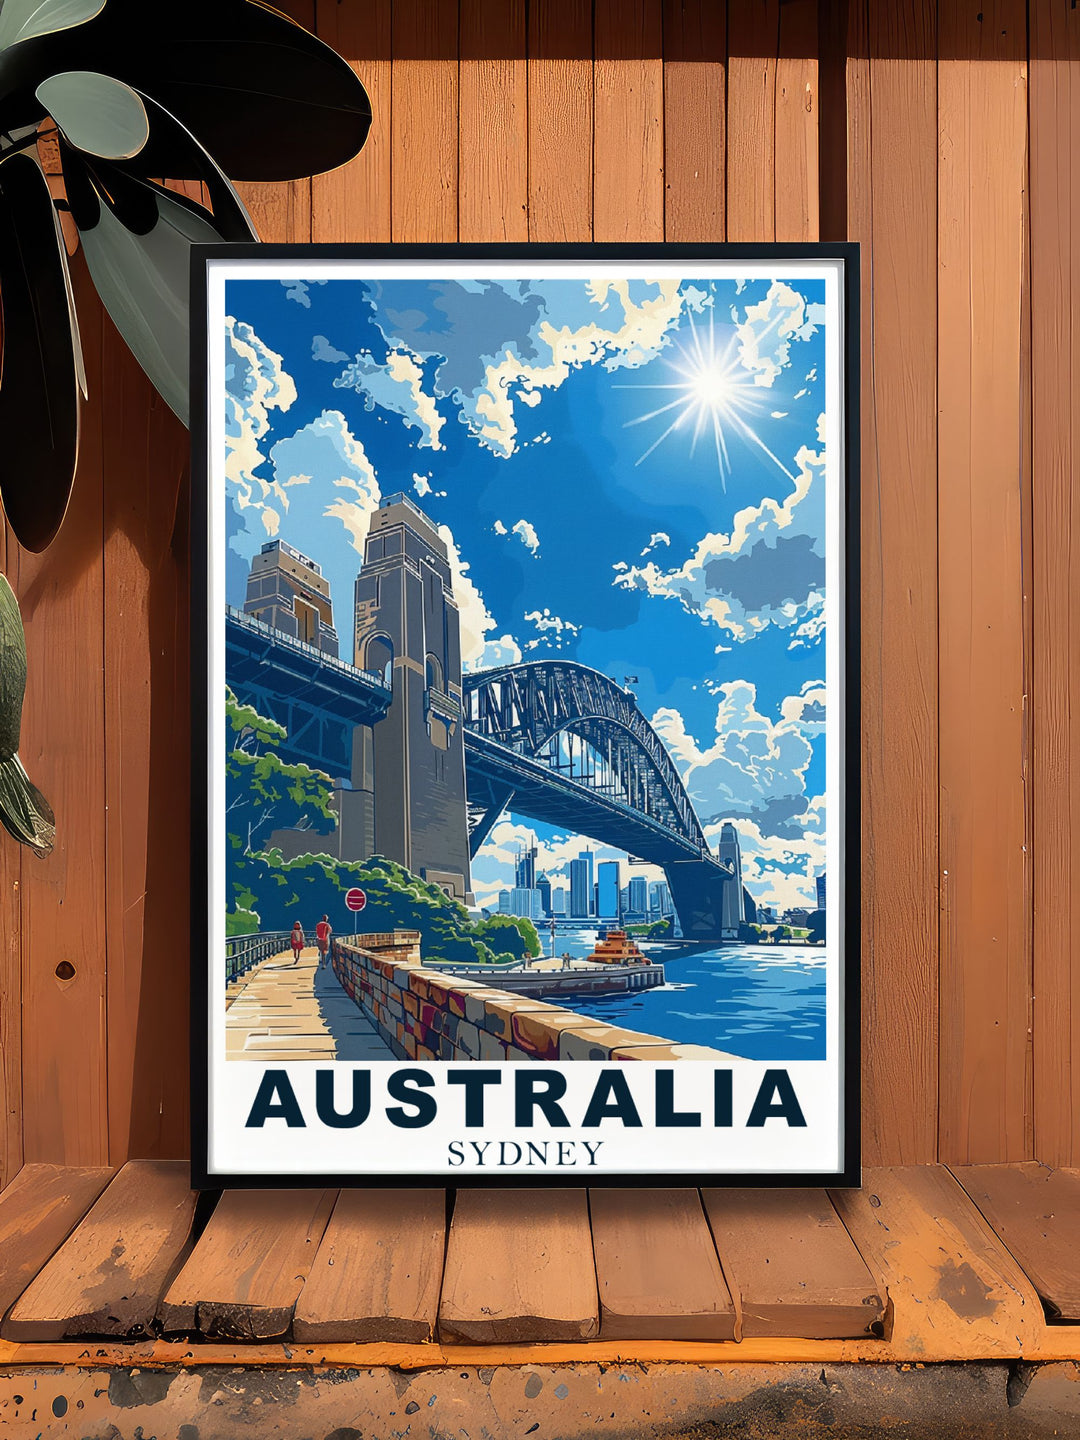 The iconic Sydney Harbor Bridge, with its steel arches and panoramic views, is captured in this detailed illustration, offering a glimpse into Sydneys vibrant urban landscape.